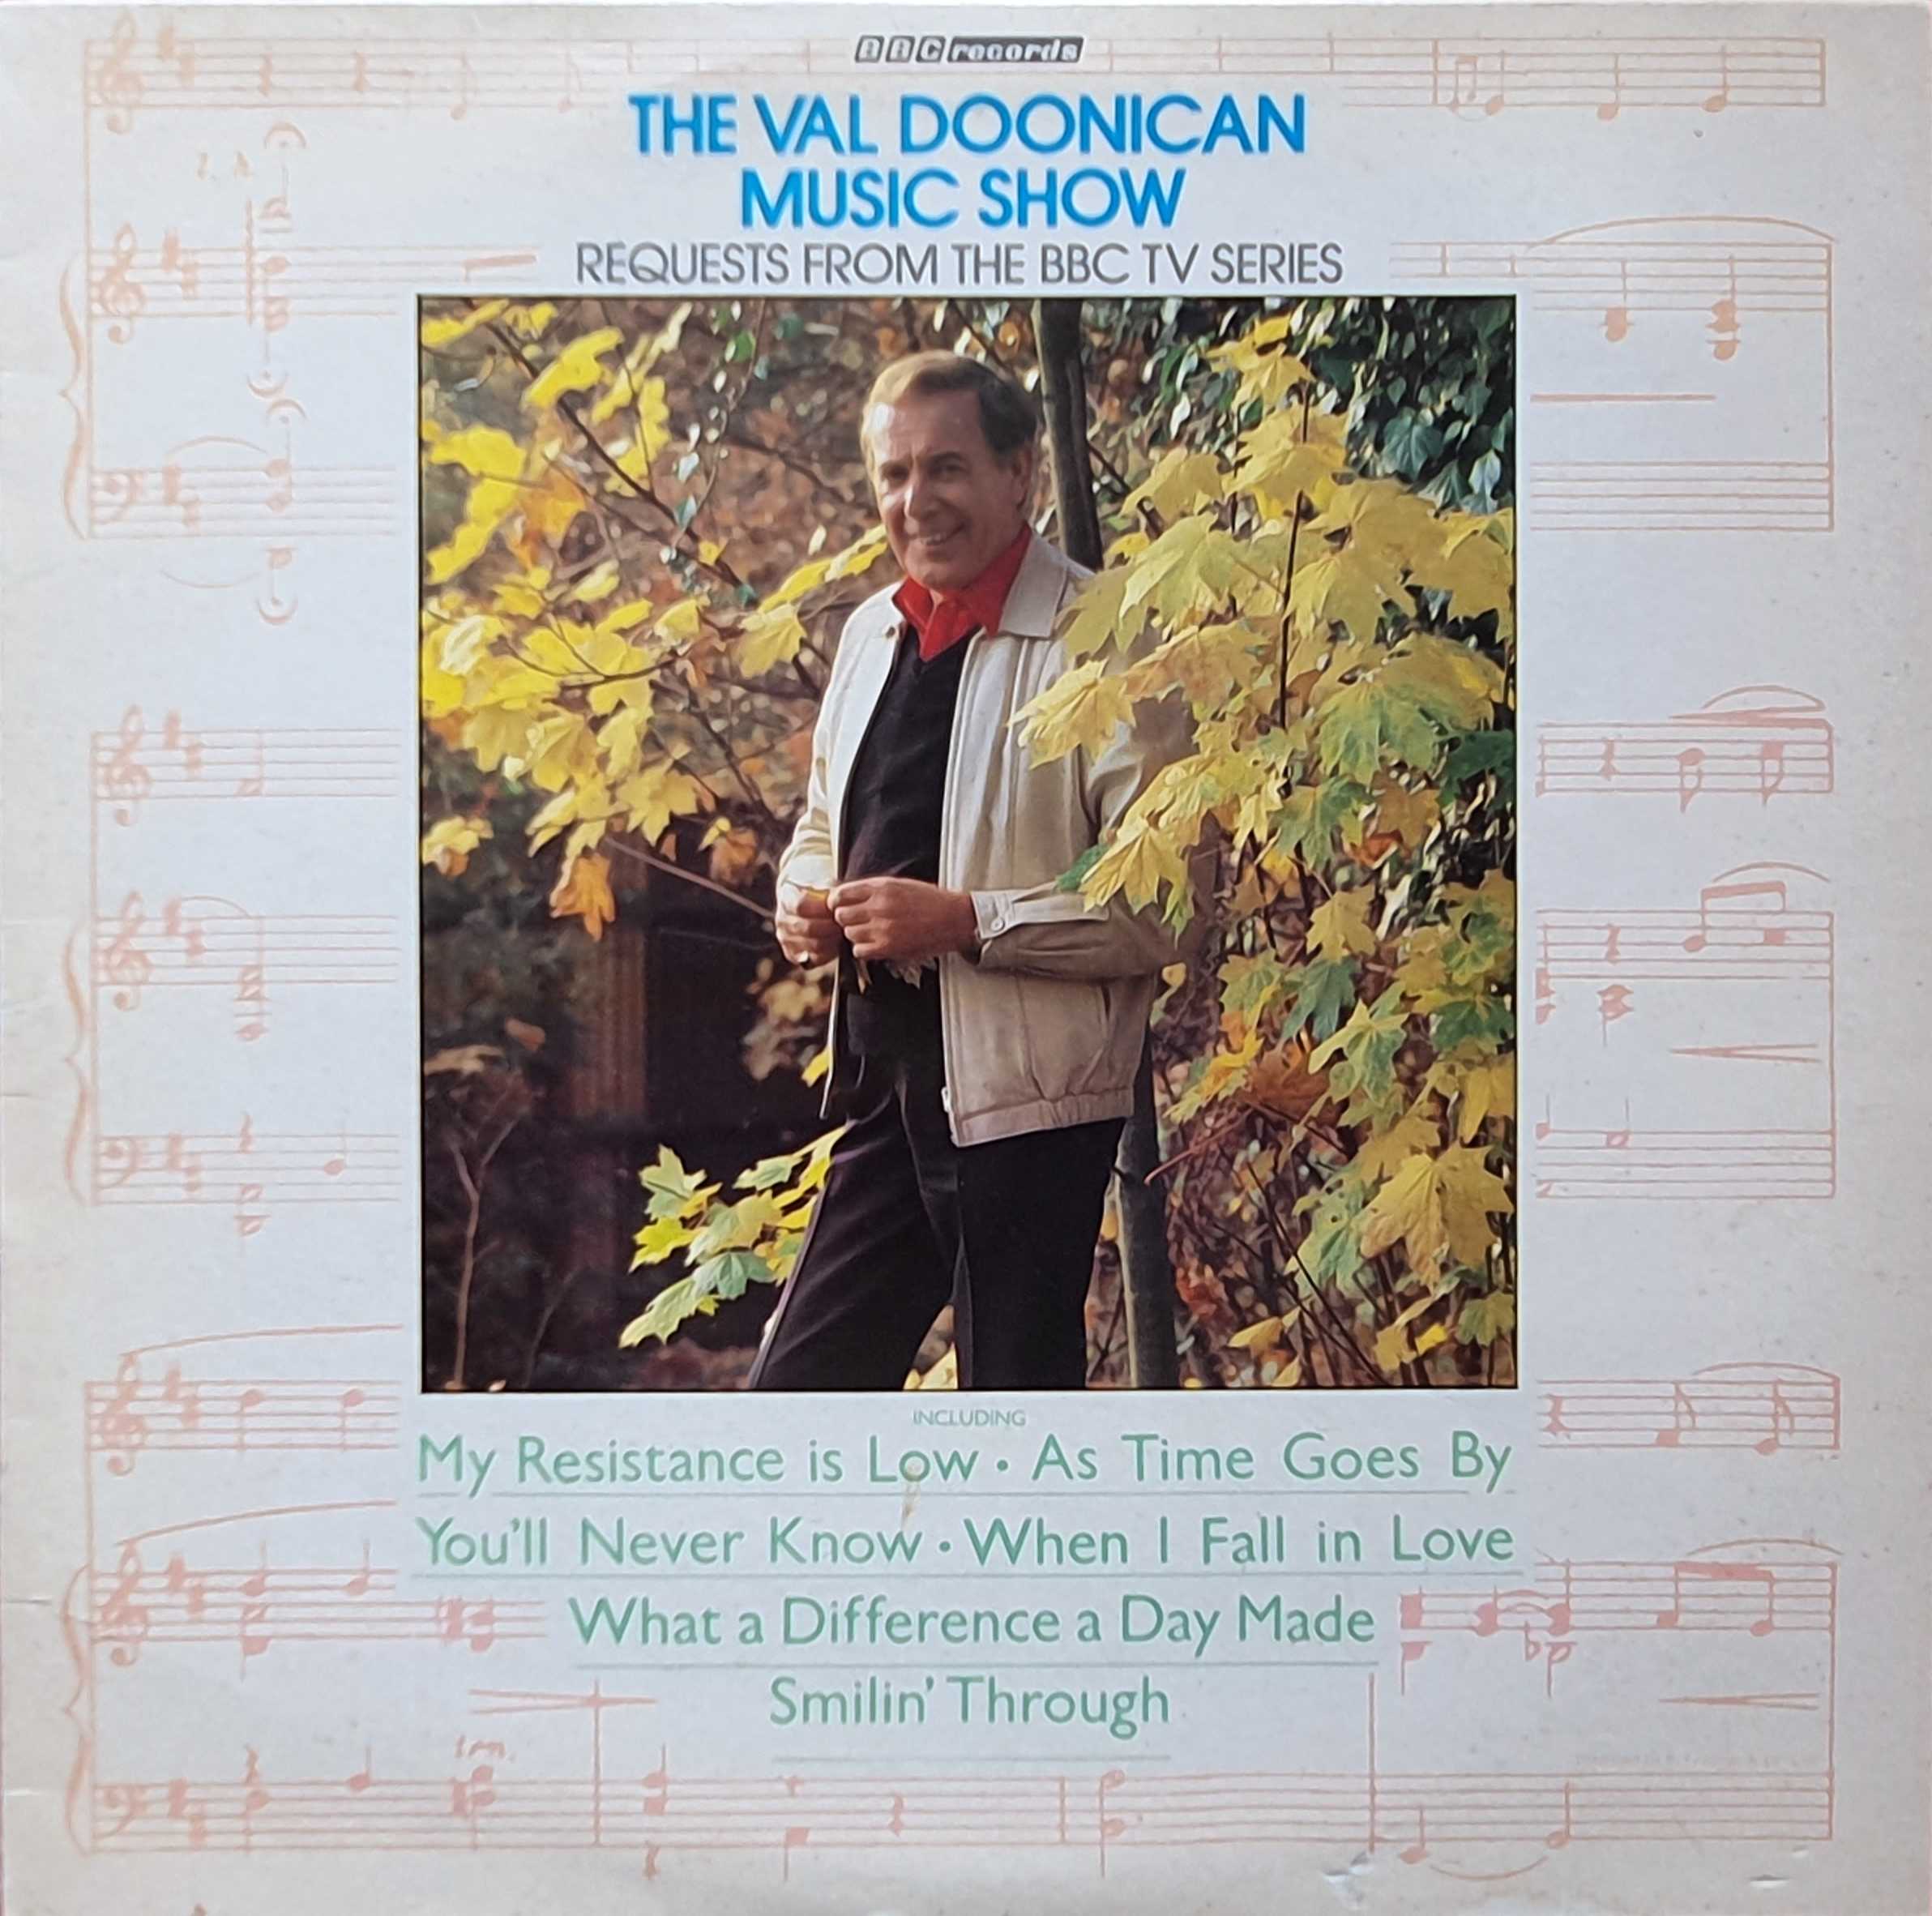 Picture of REB 510 The Val Doonican music show by artist Various from the BBC albums - Records and Tapes library